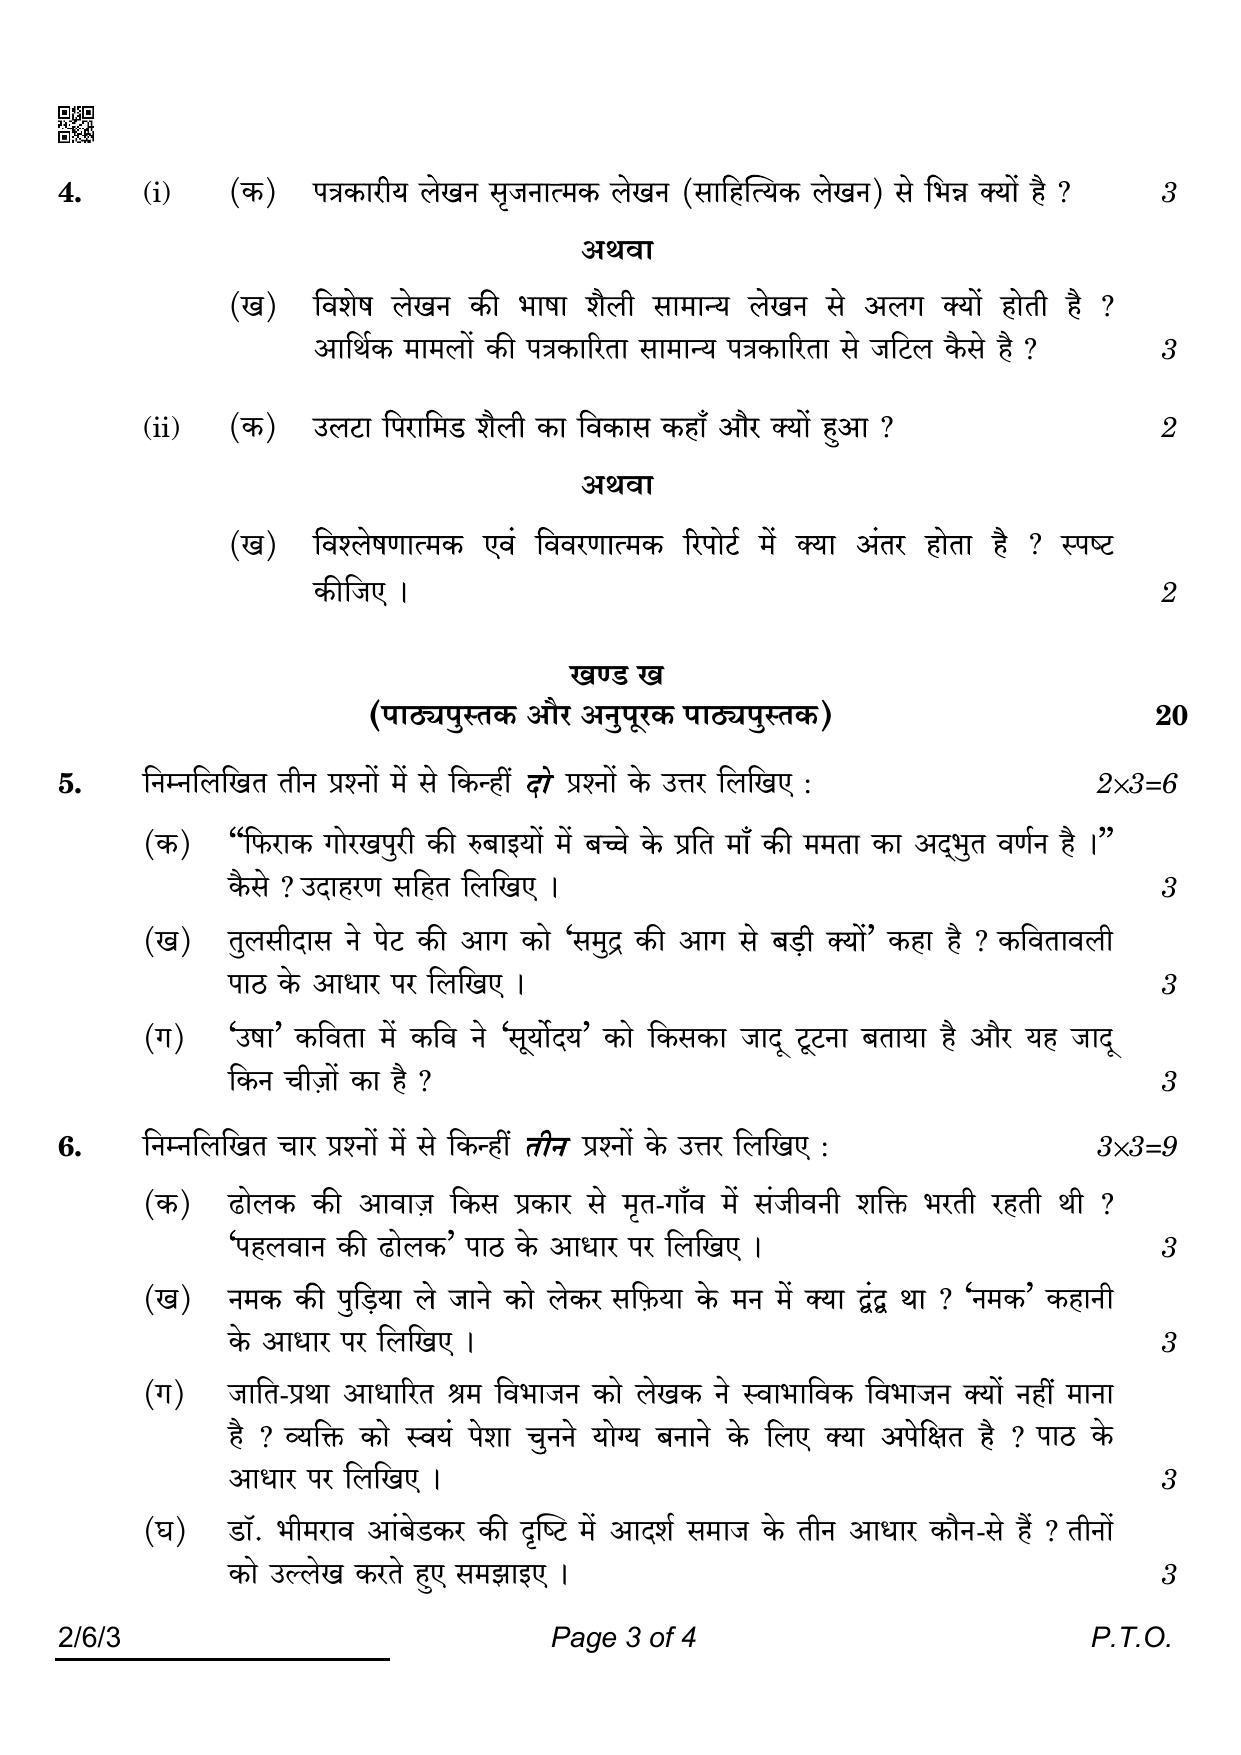 CBSE Class 12 2-6-3 Hindi Core 2022 Compartment Question Paper - Page 3